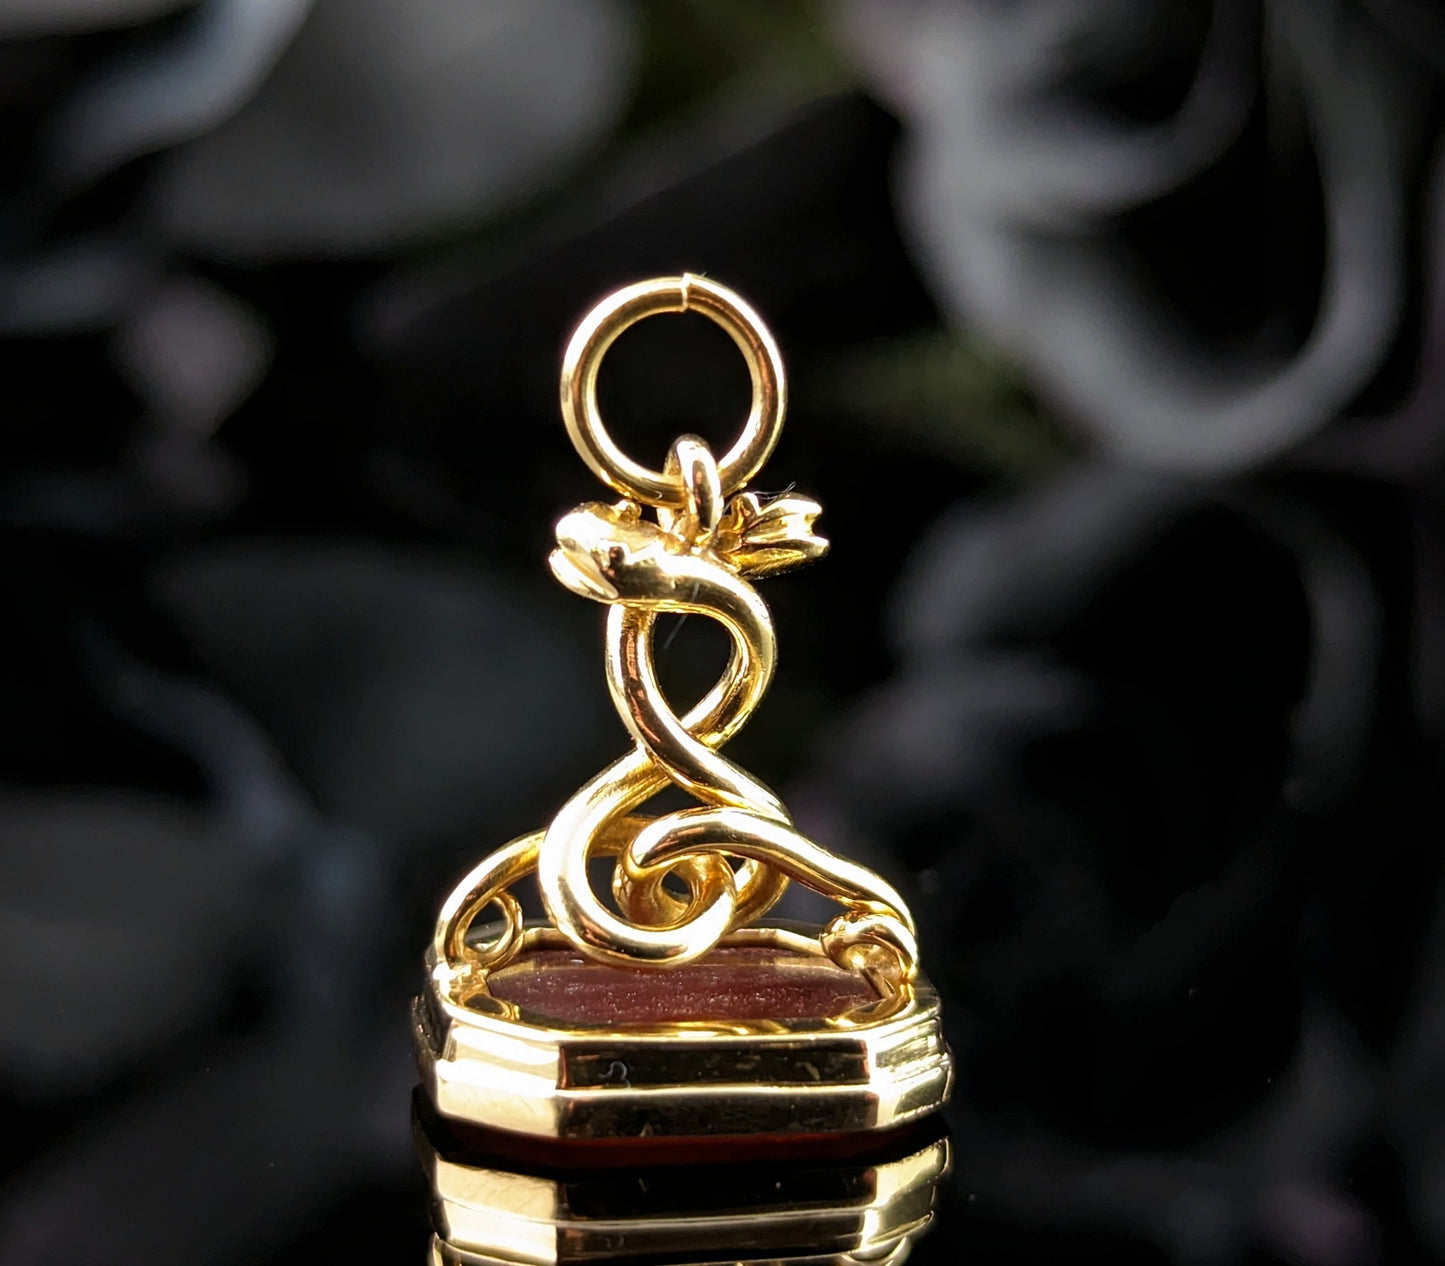 Antique 18ct gold Entwined snakes seal fob pendant, Carnelian